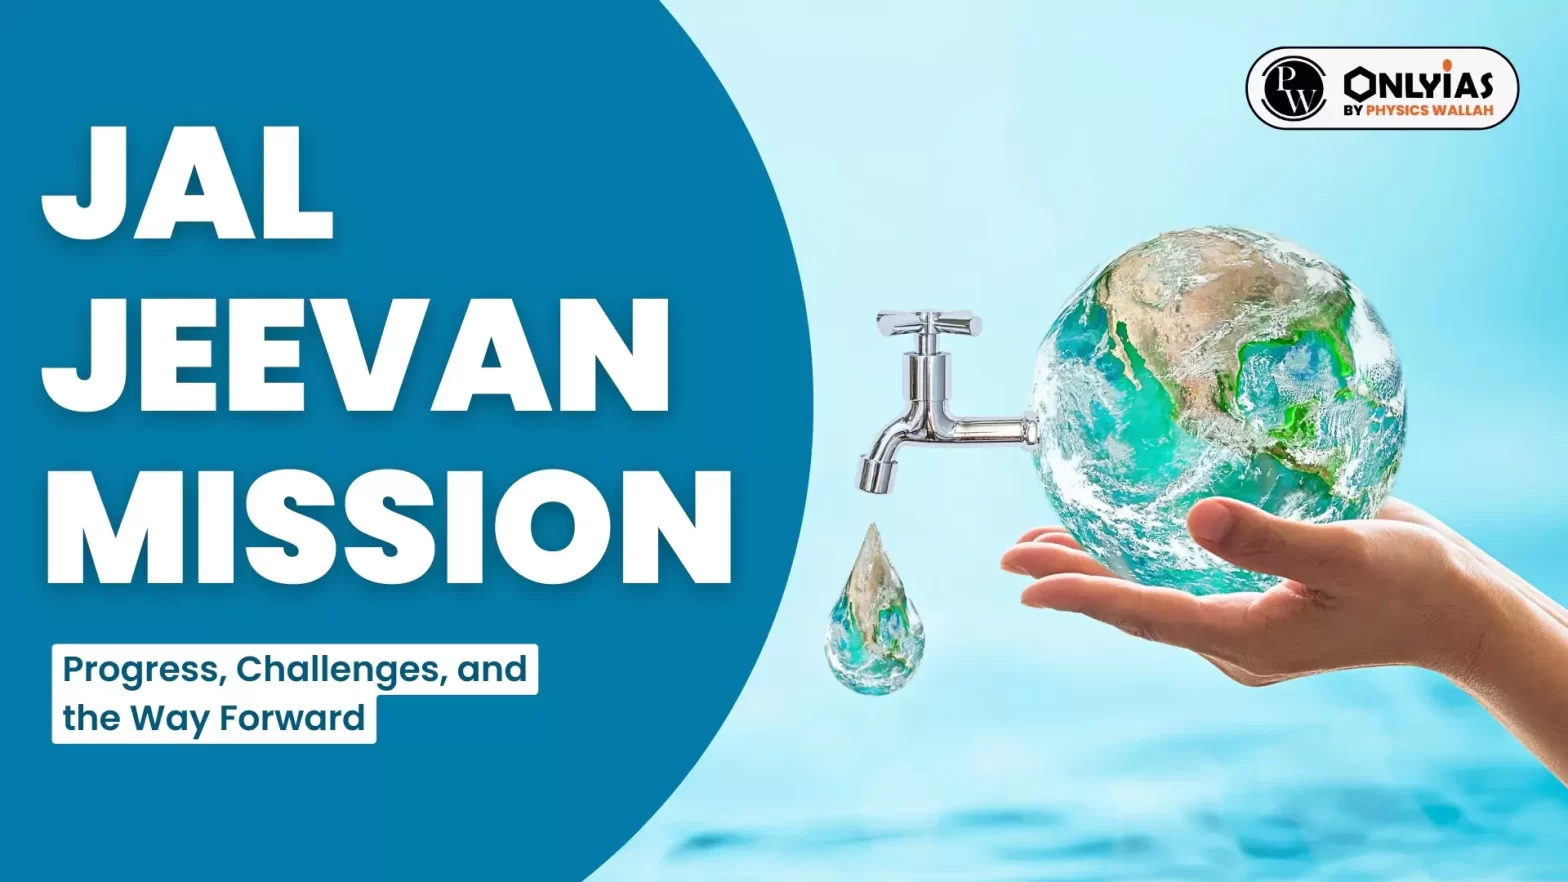 Jal Jeevan Mission: Progress, Challenges, and the Way Forward